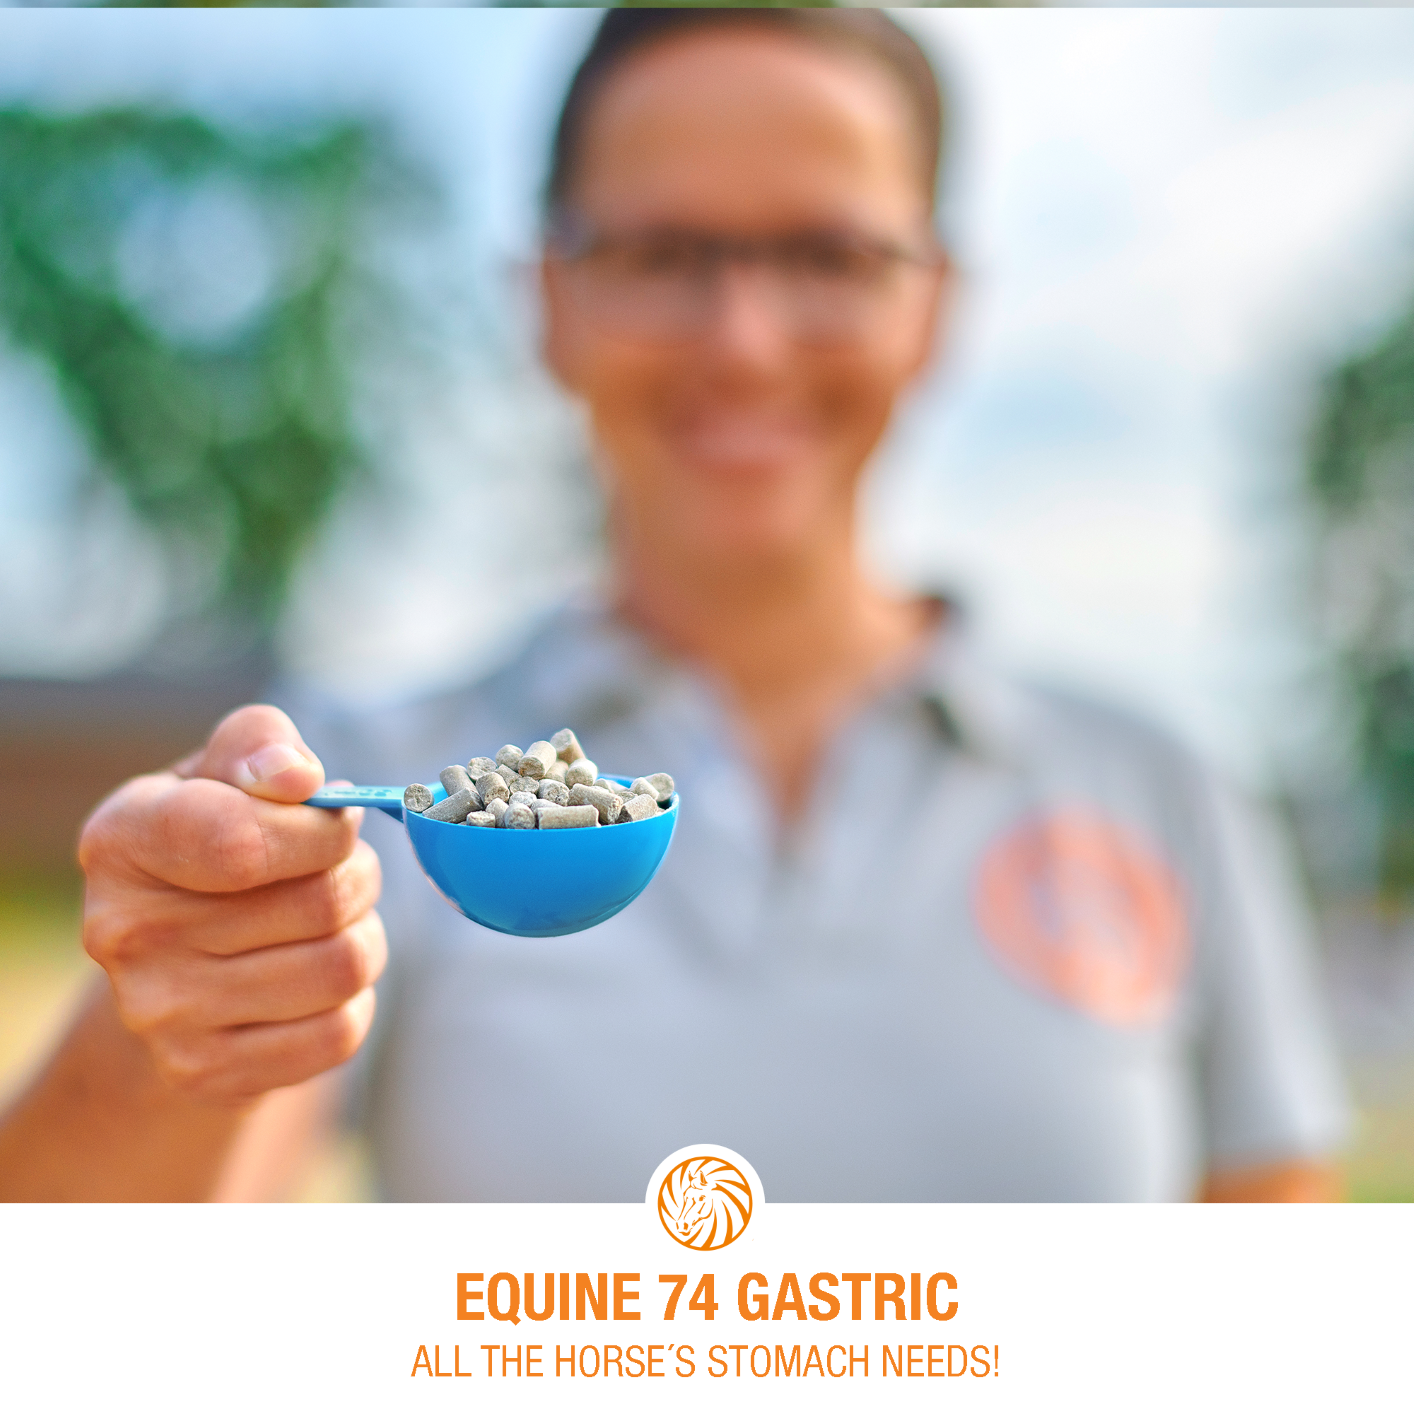 Equine 74 Gastric - Free Sample - Limit of 1 per customer Digestion Care Gray